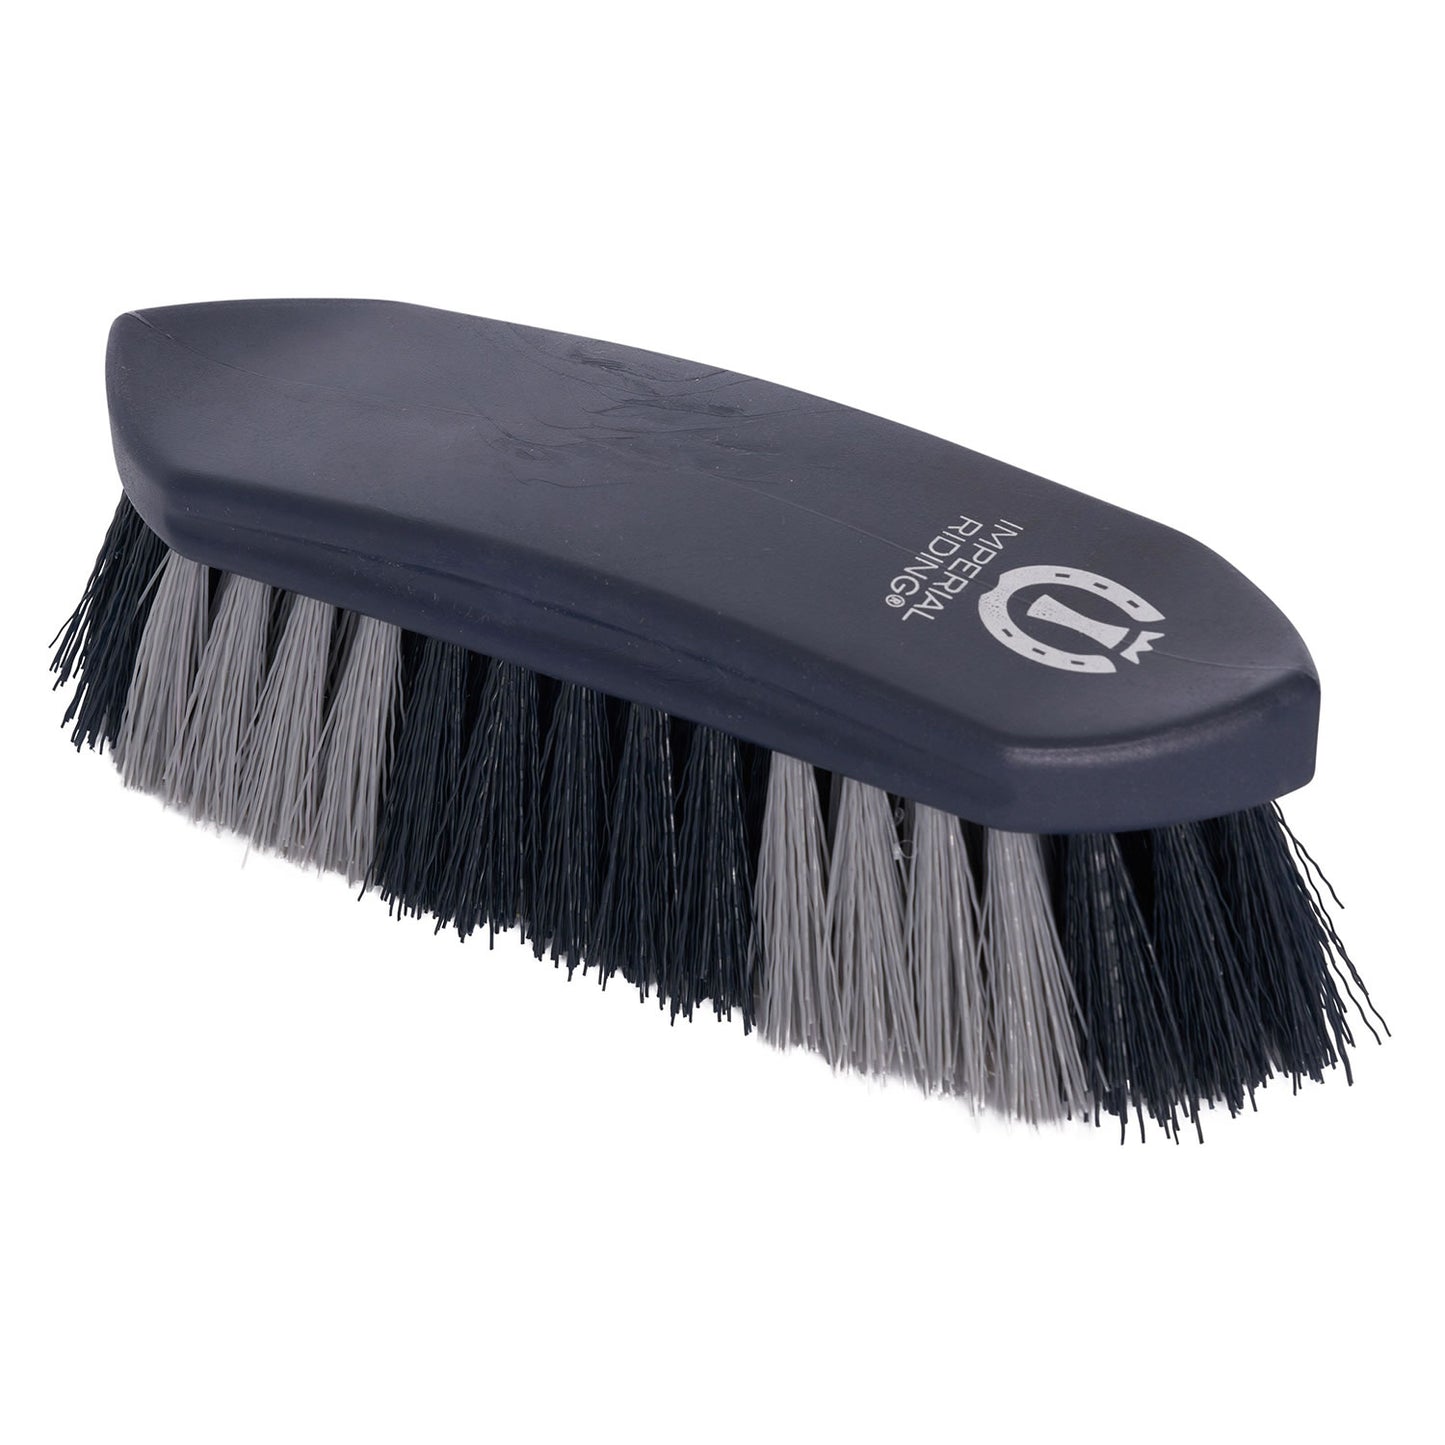 IMPERIAL RIDING DANDY BRUSH HARD TWO-TONE